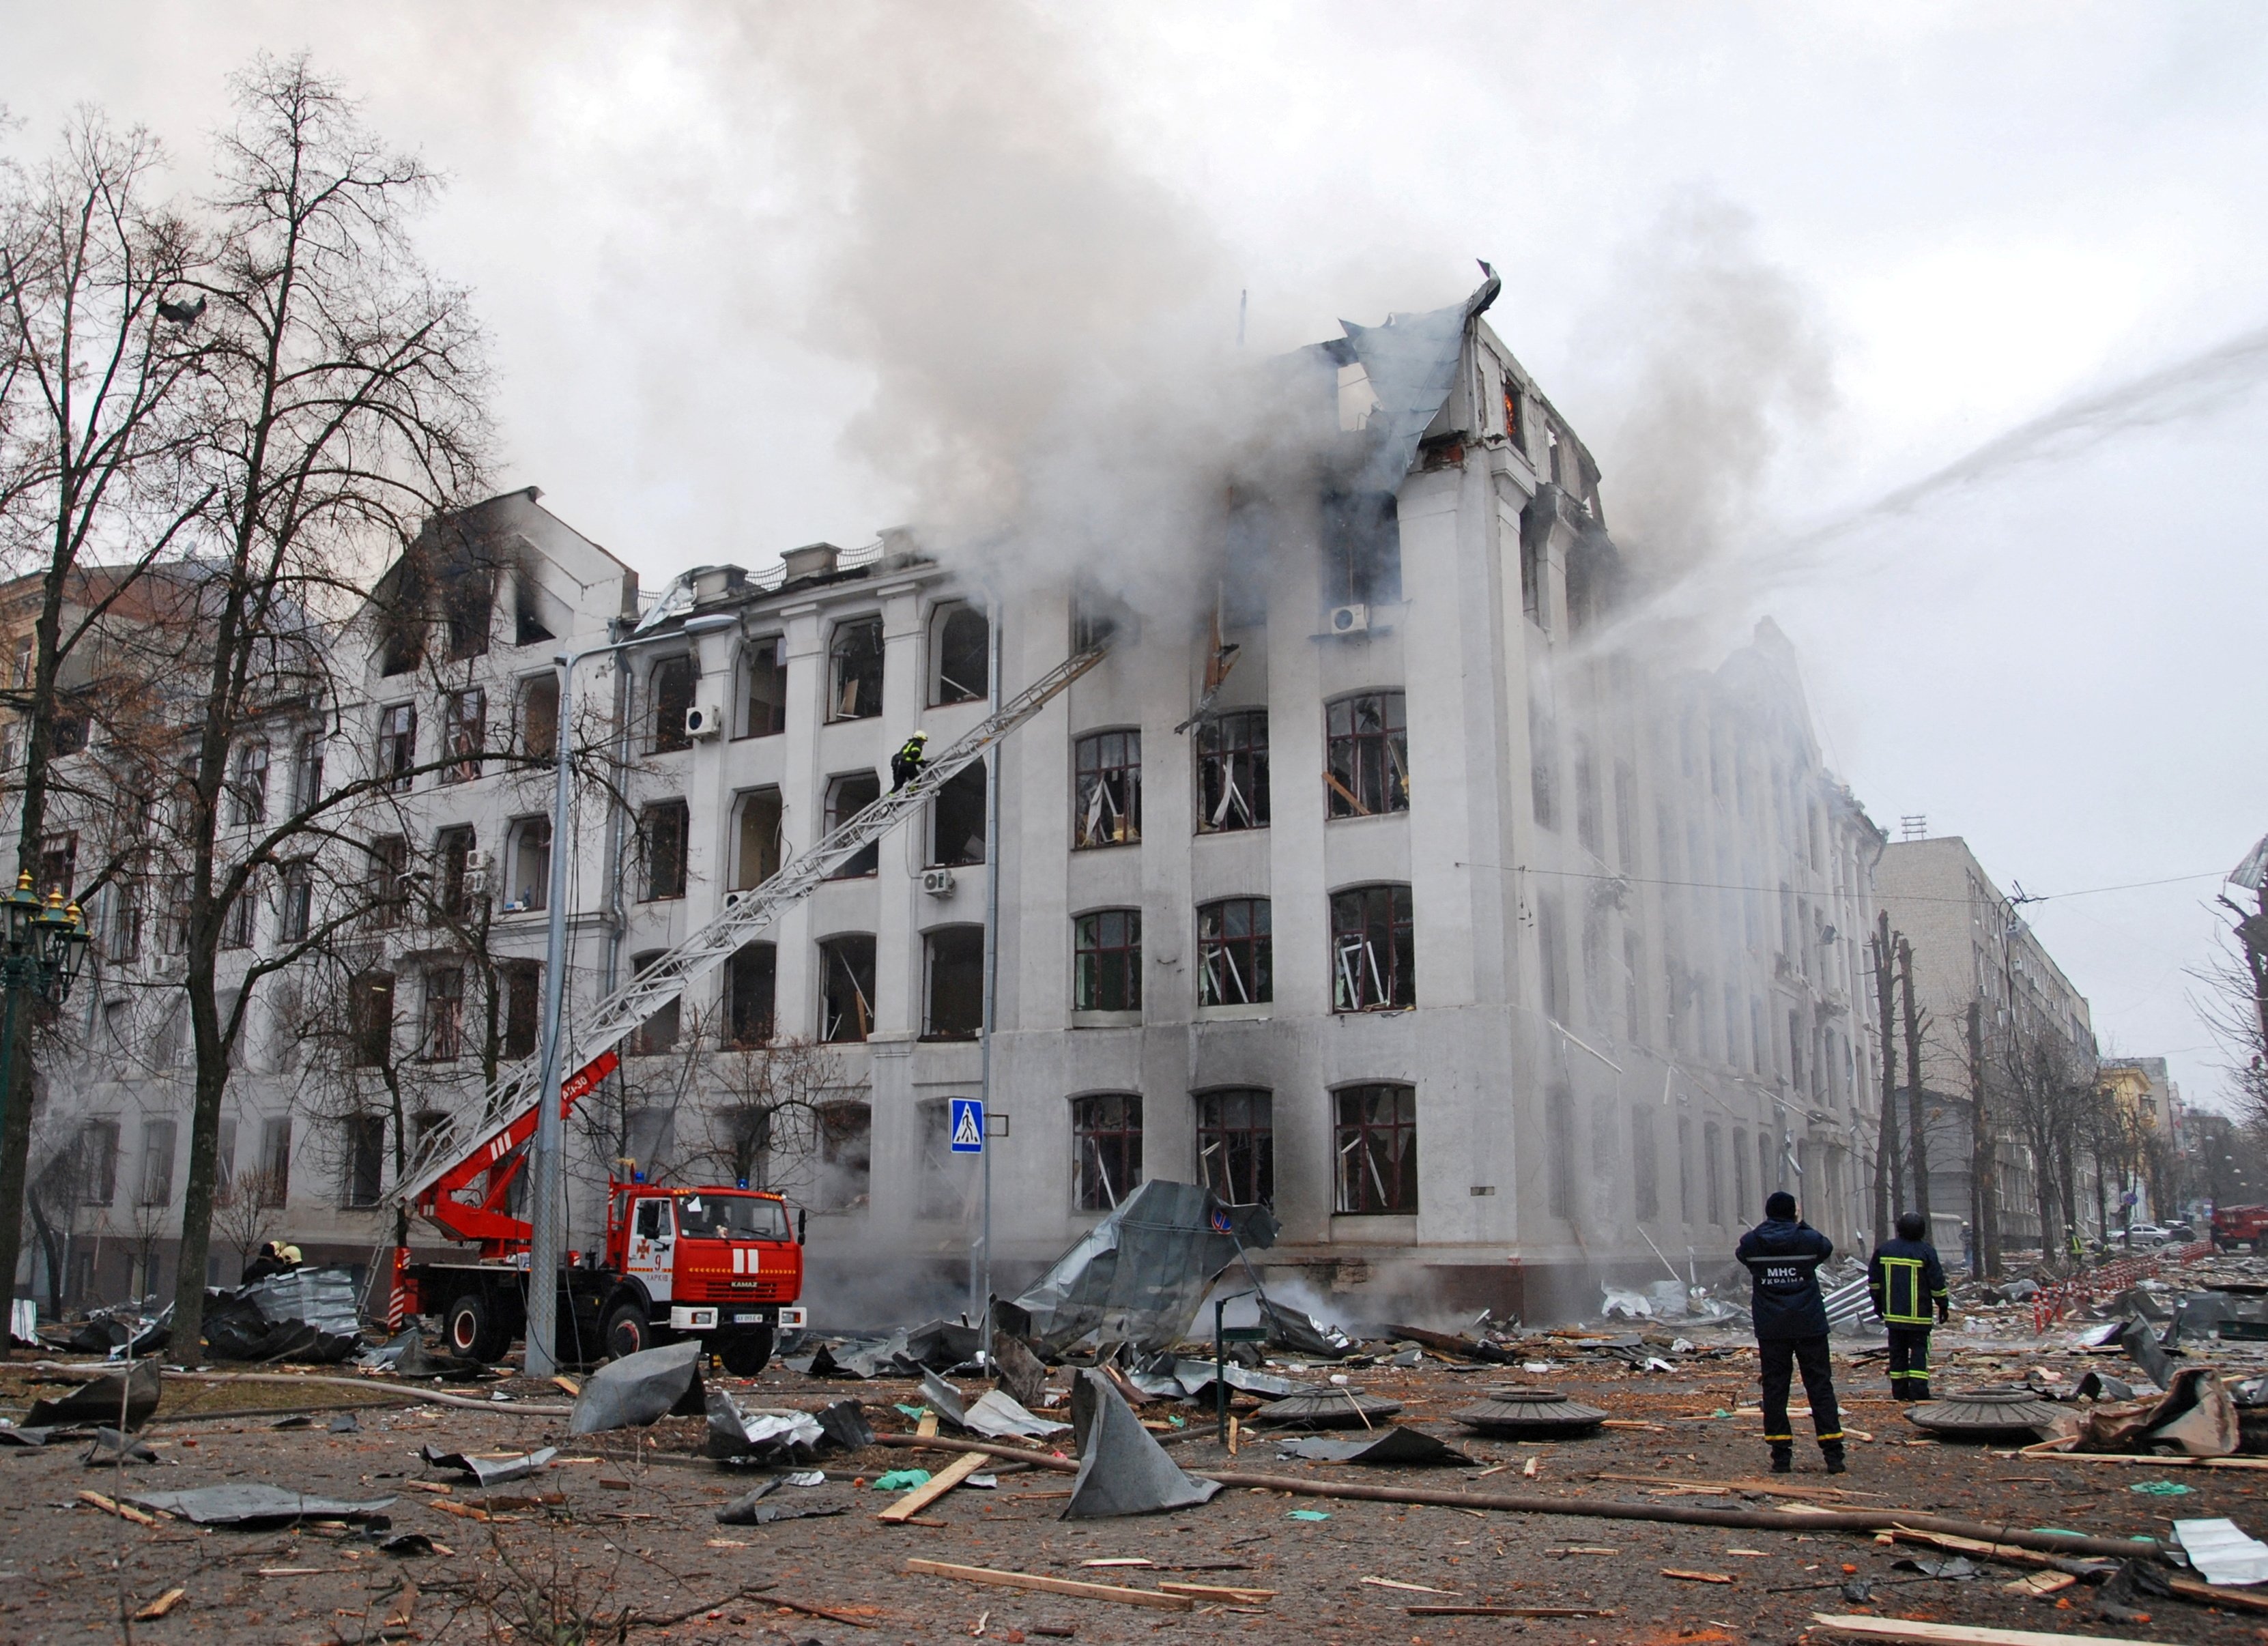 Firefighters put out a blaze at the Kharkiv National University building, in Ukraine, which city officials said was damaged by shelling, on March 22. Photo: Reuters